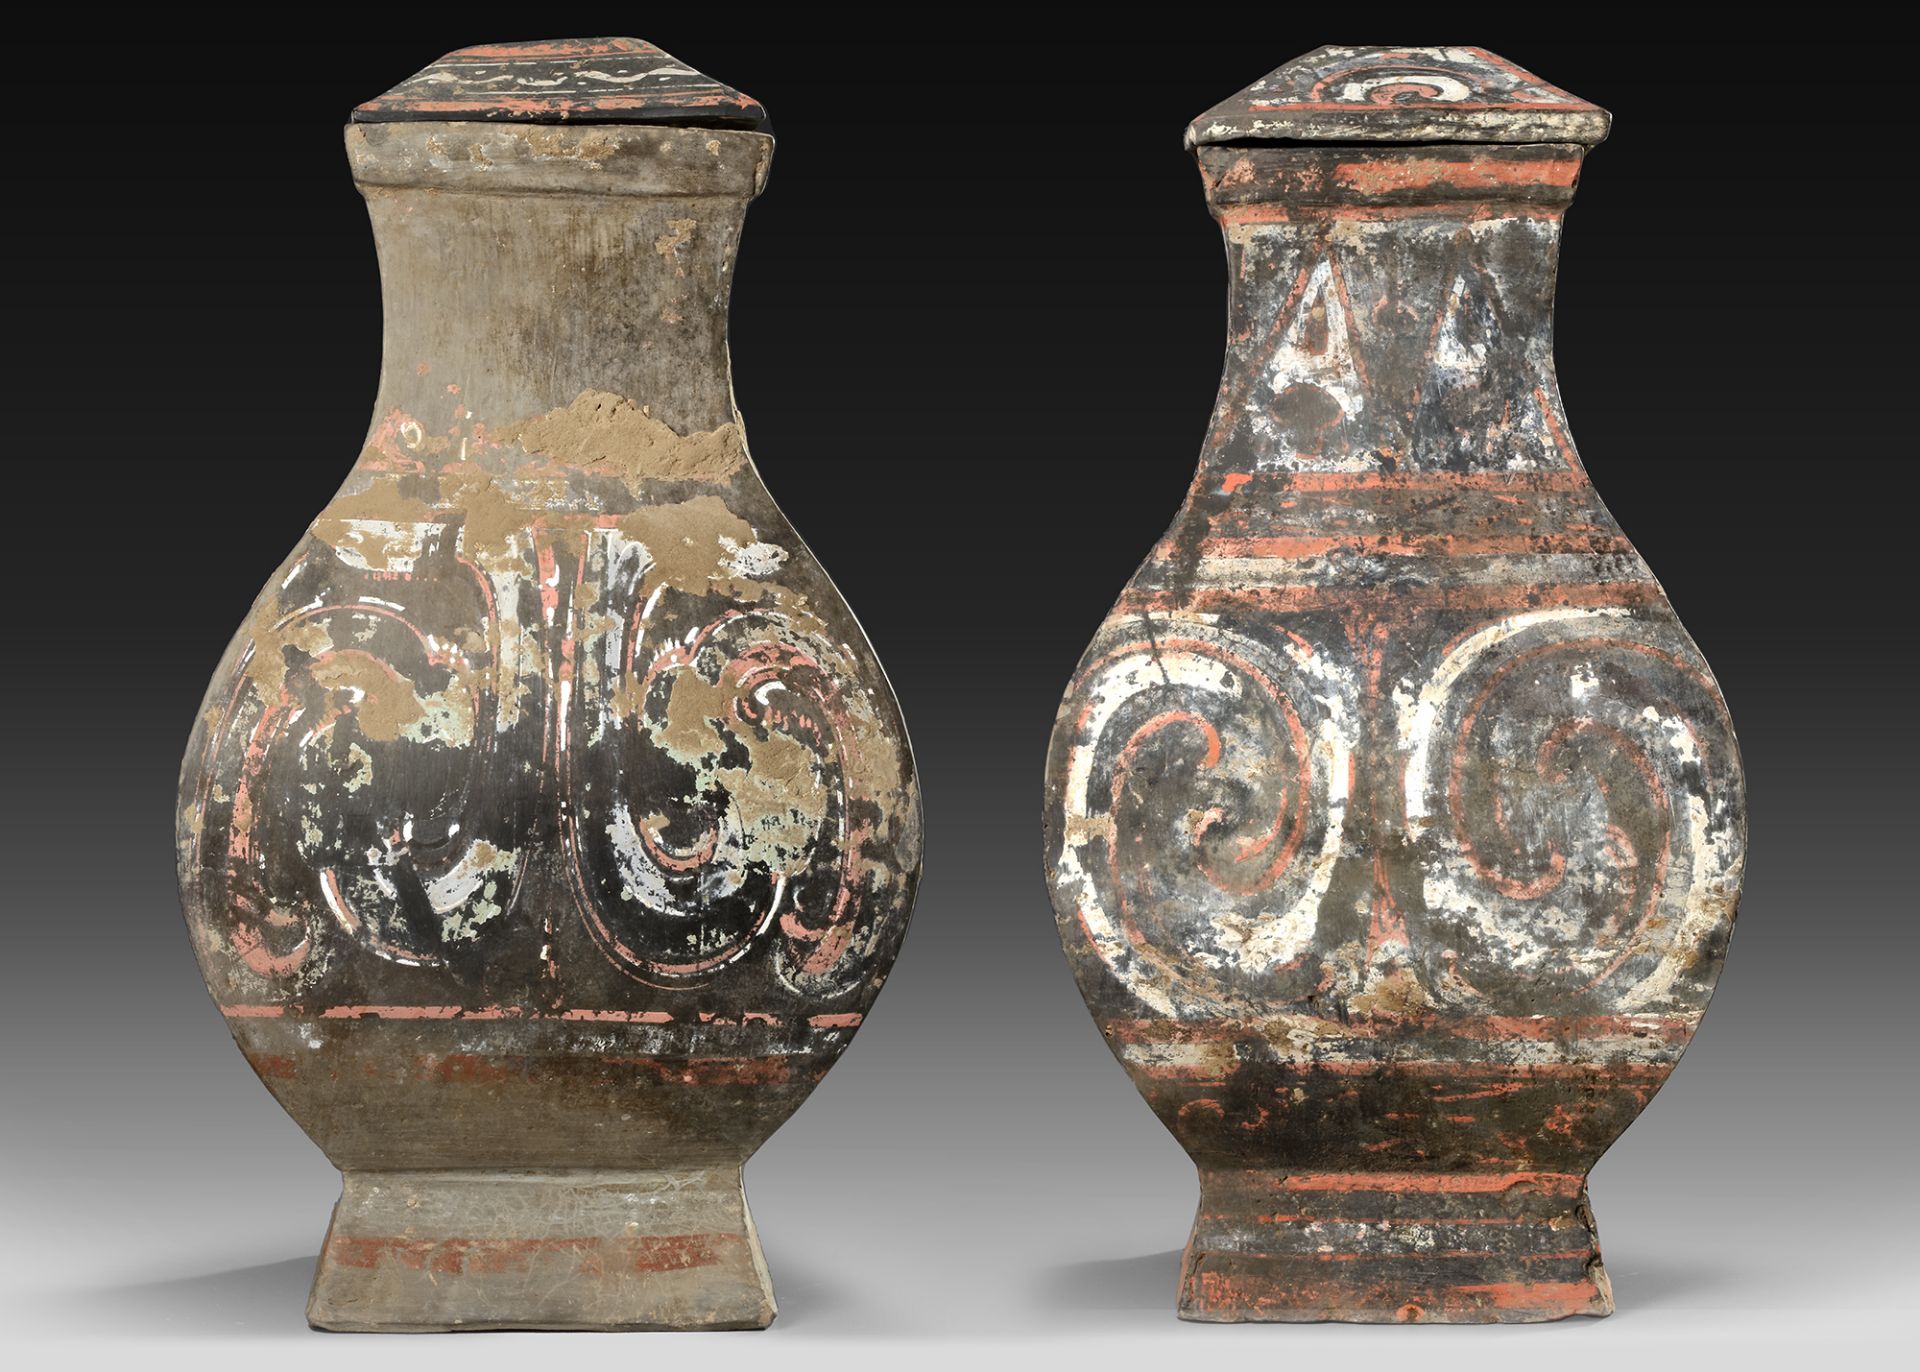 A PAIR OF CHINESE POTTERY 'FANG HU' VASES, HAN DYNASTY (206 BC-220 AD) - Image 2 of 15